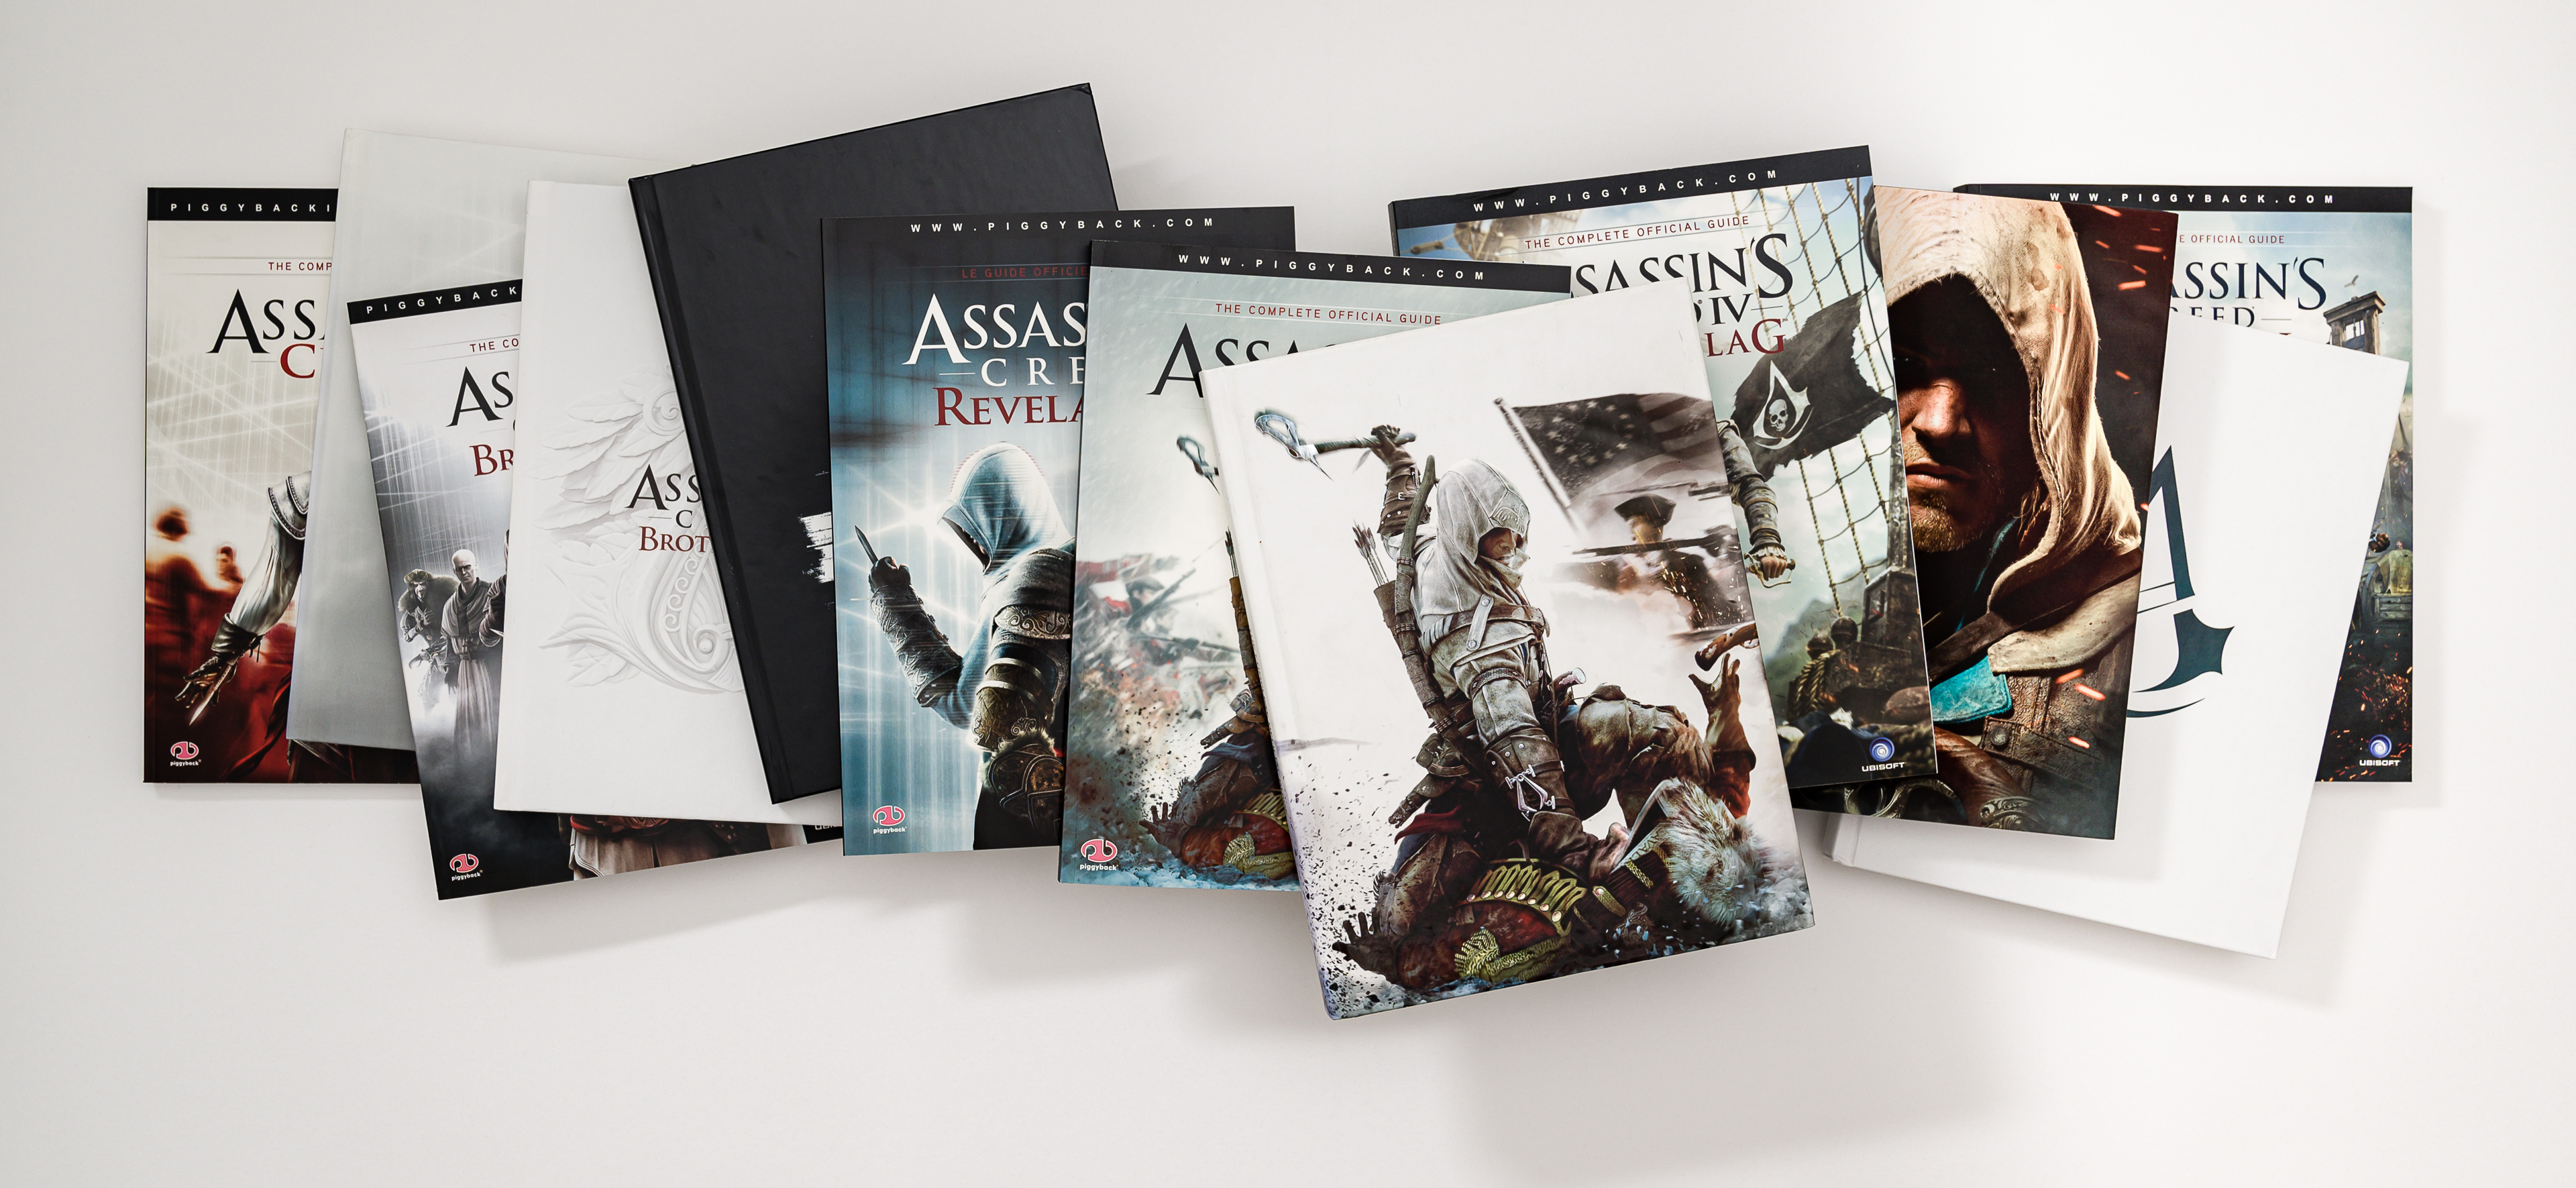 Assassin's Creed Revelations - The Complete by Piggyback